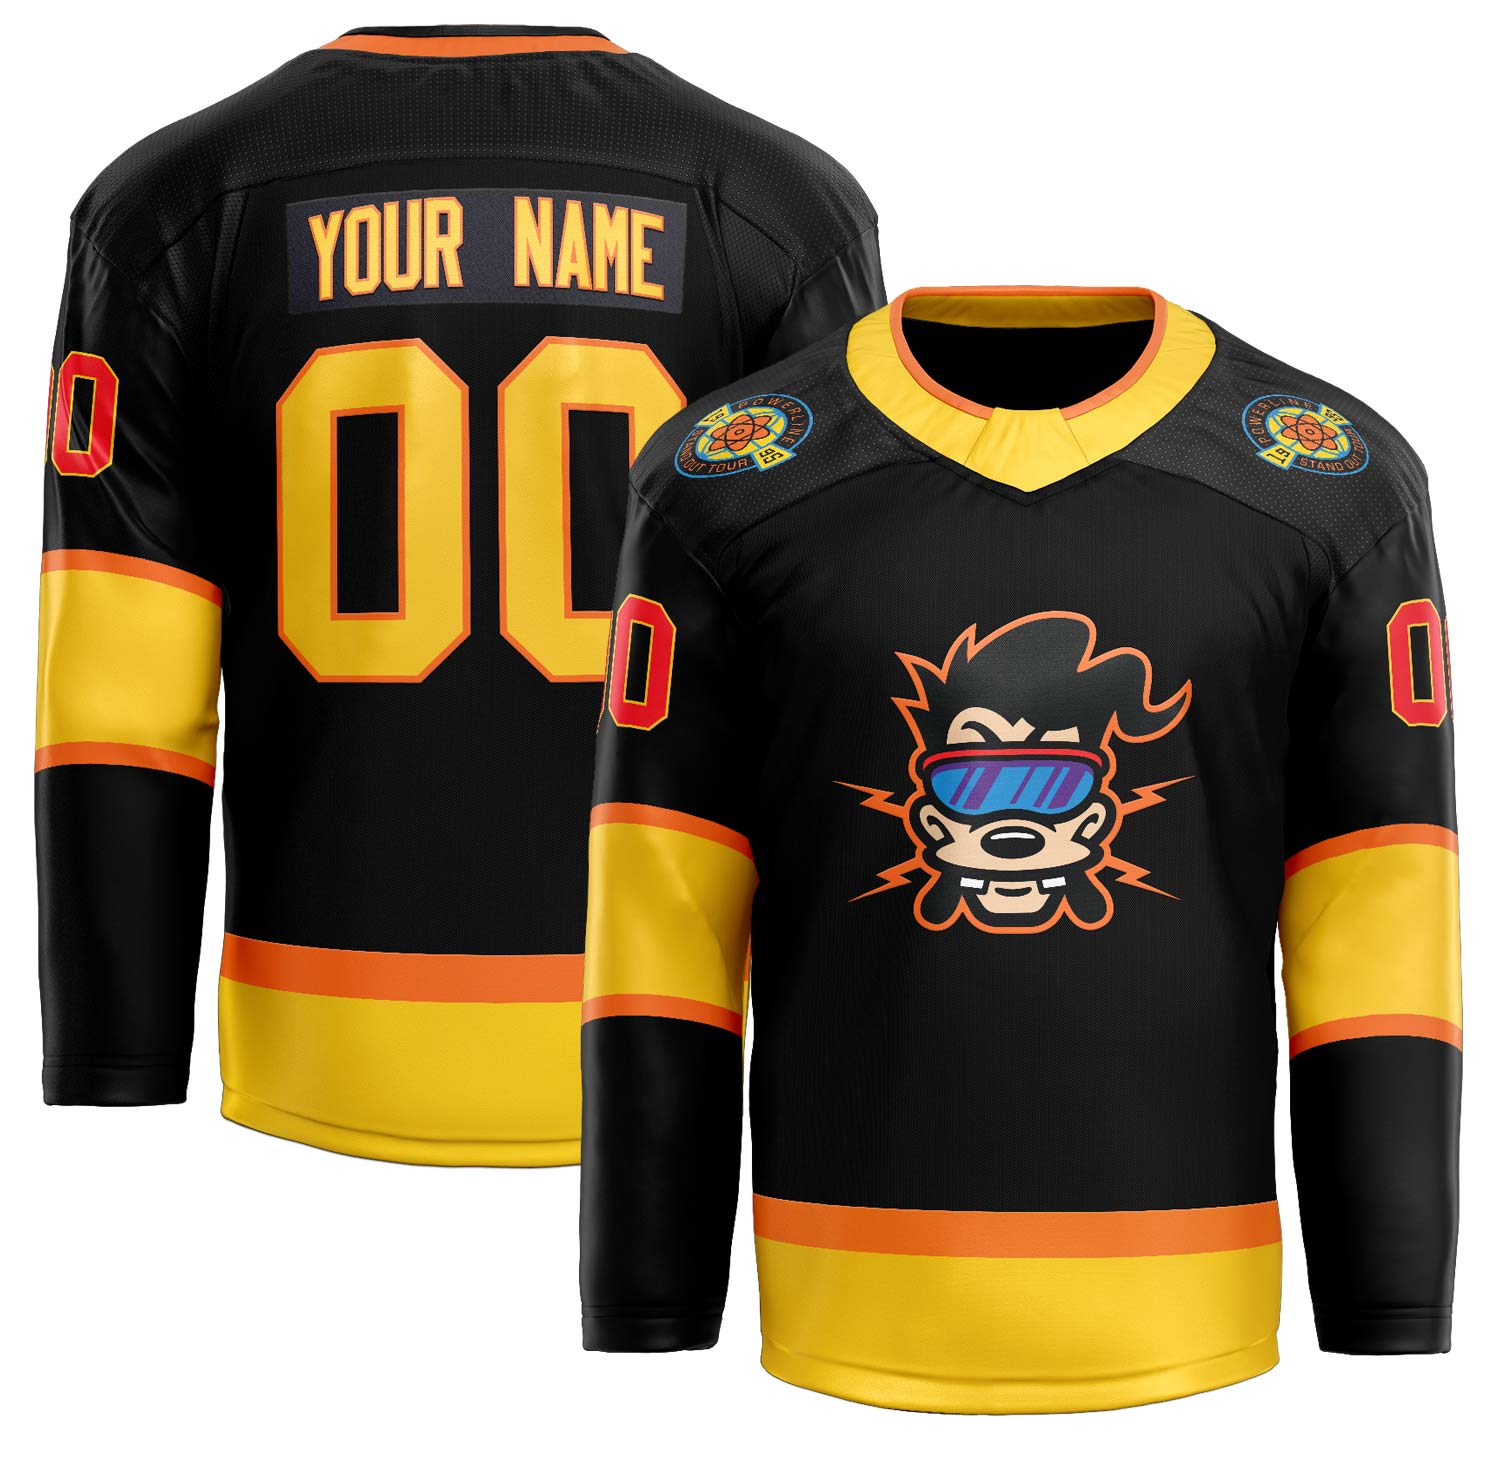 Hip with Bruin Hockey Jerseys - We Add Your Name and Number